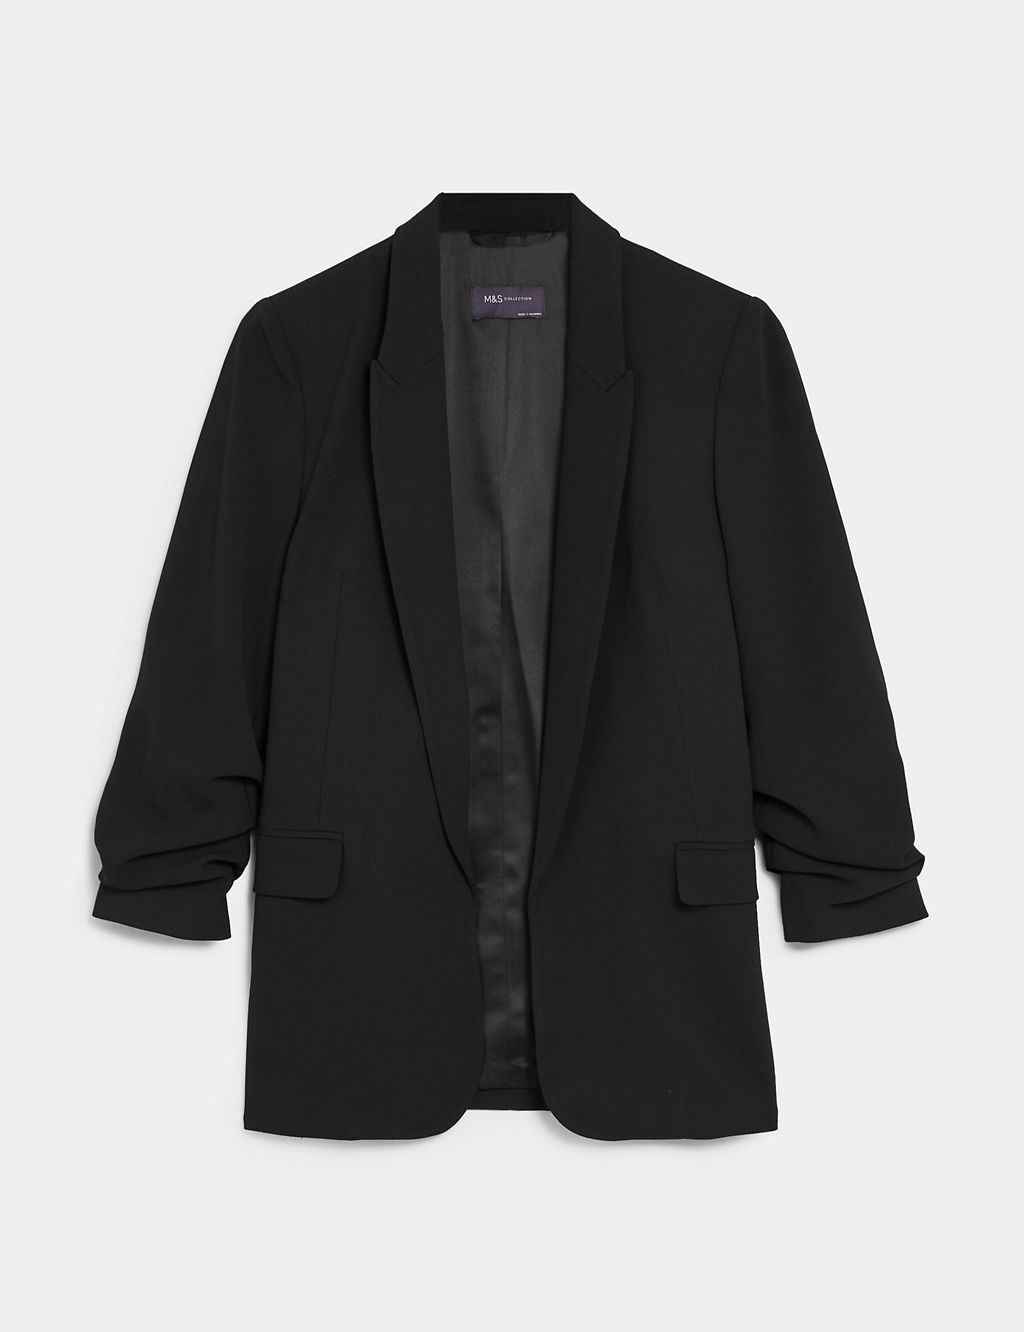 Ruched Sleeve Blazer 1 of 5